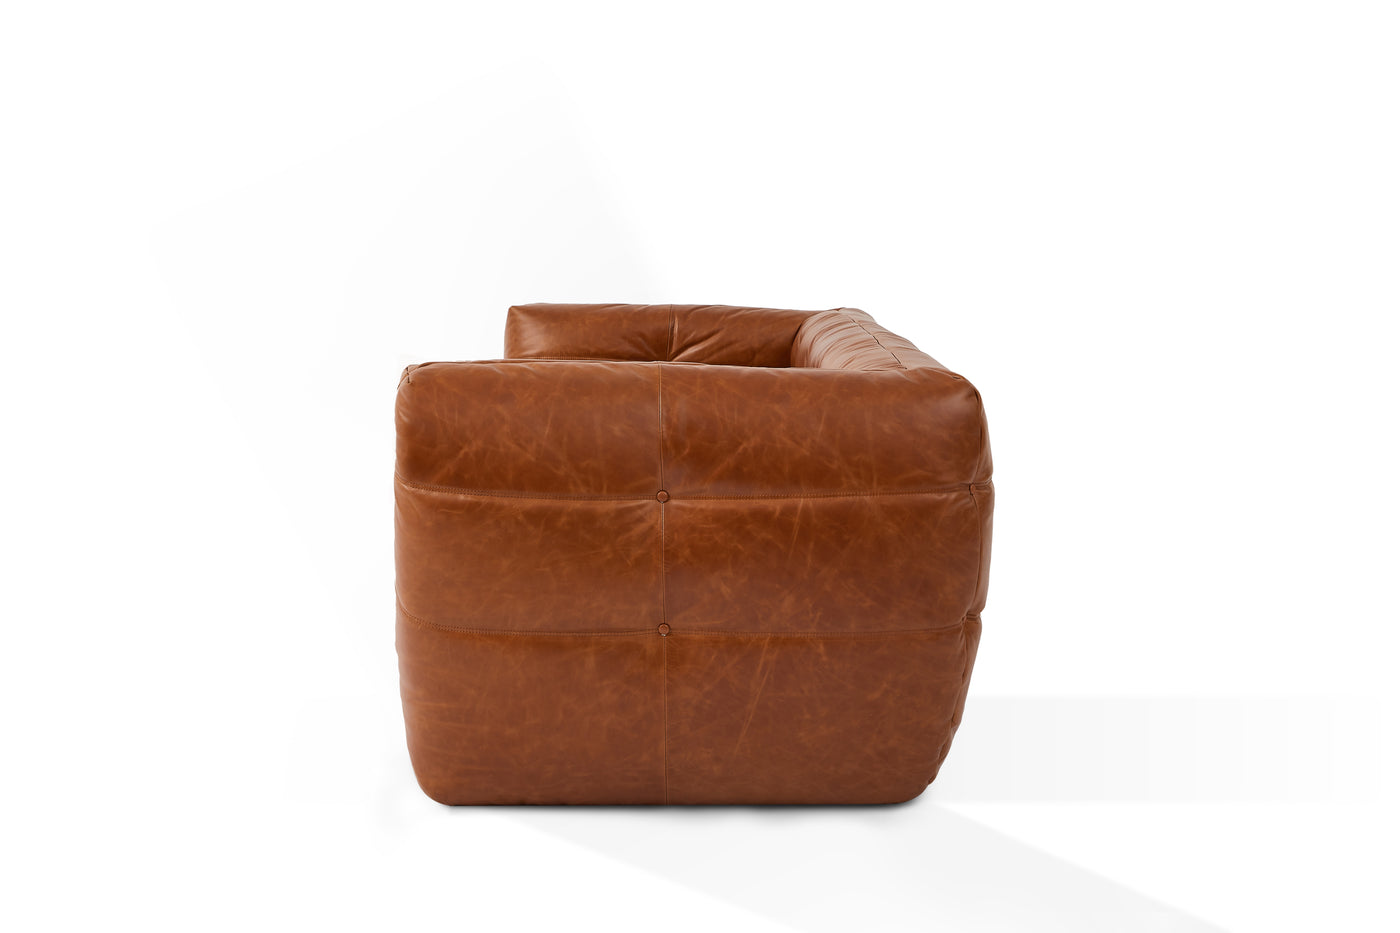 Russo2 Corner sofa in Vintage leather